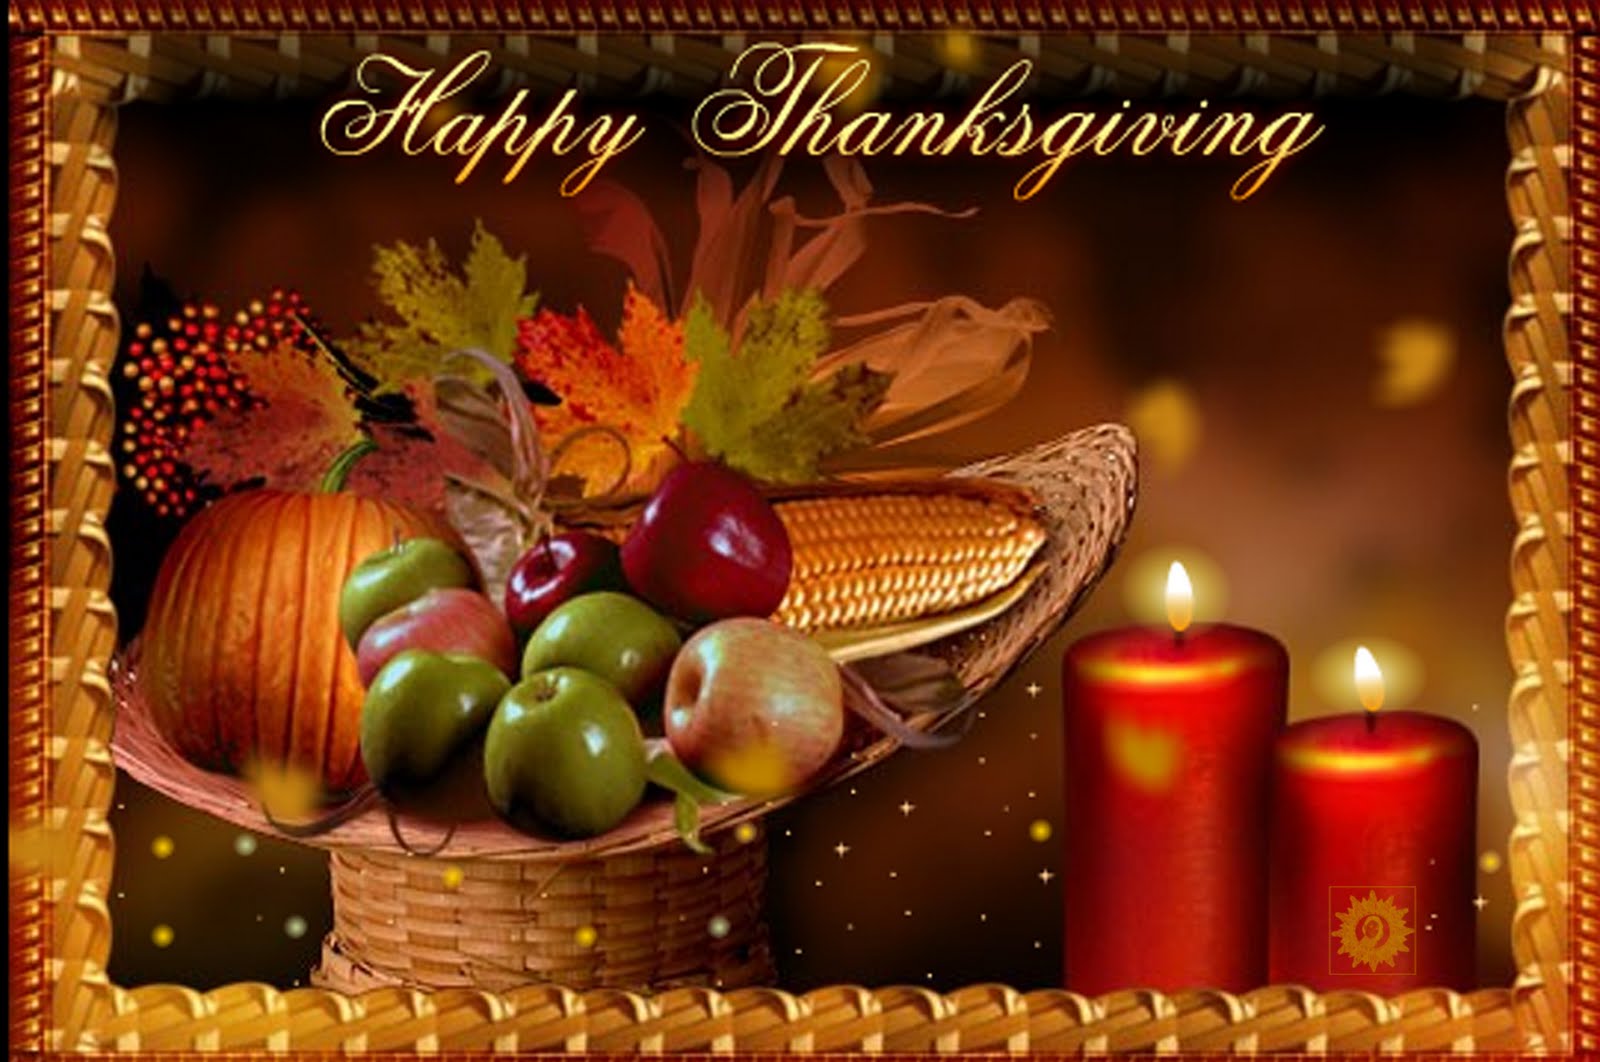 We Wish You A Very Happy Thanksgiving On Behalf Of The Olivet New